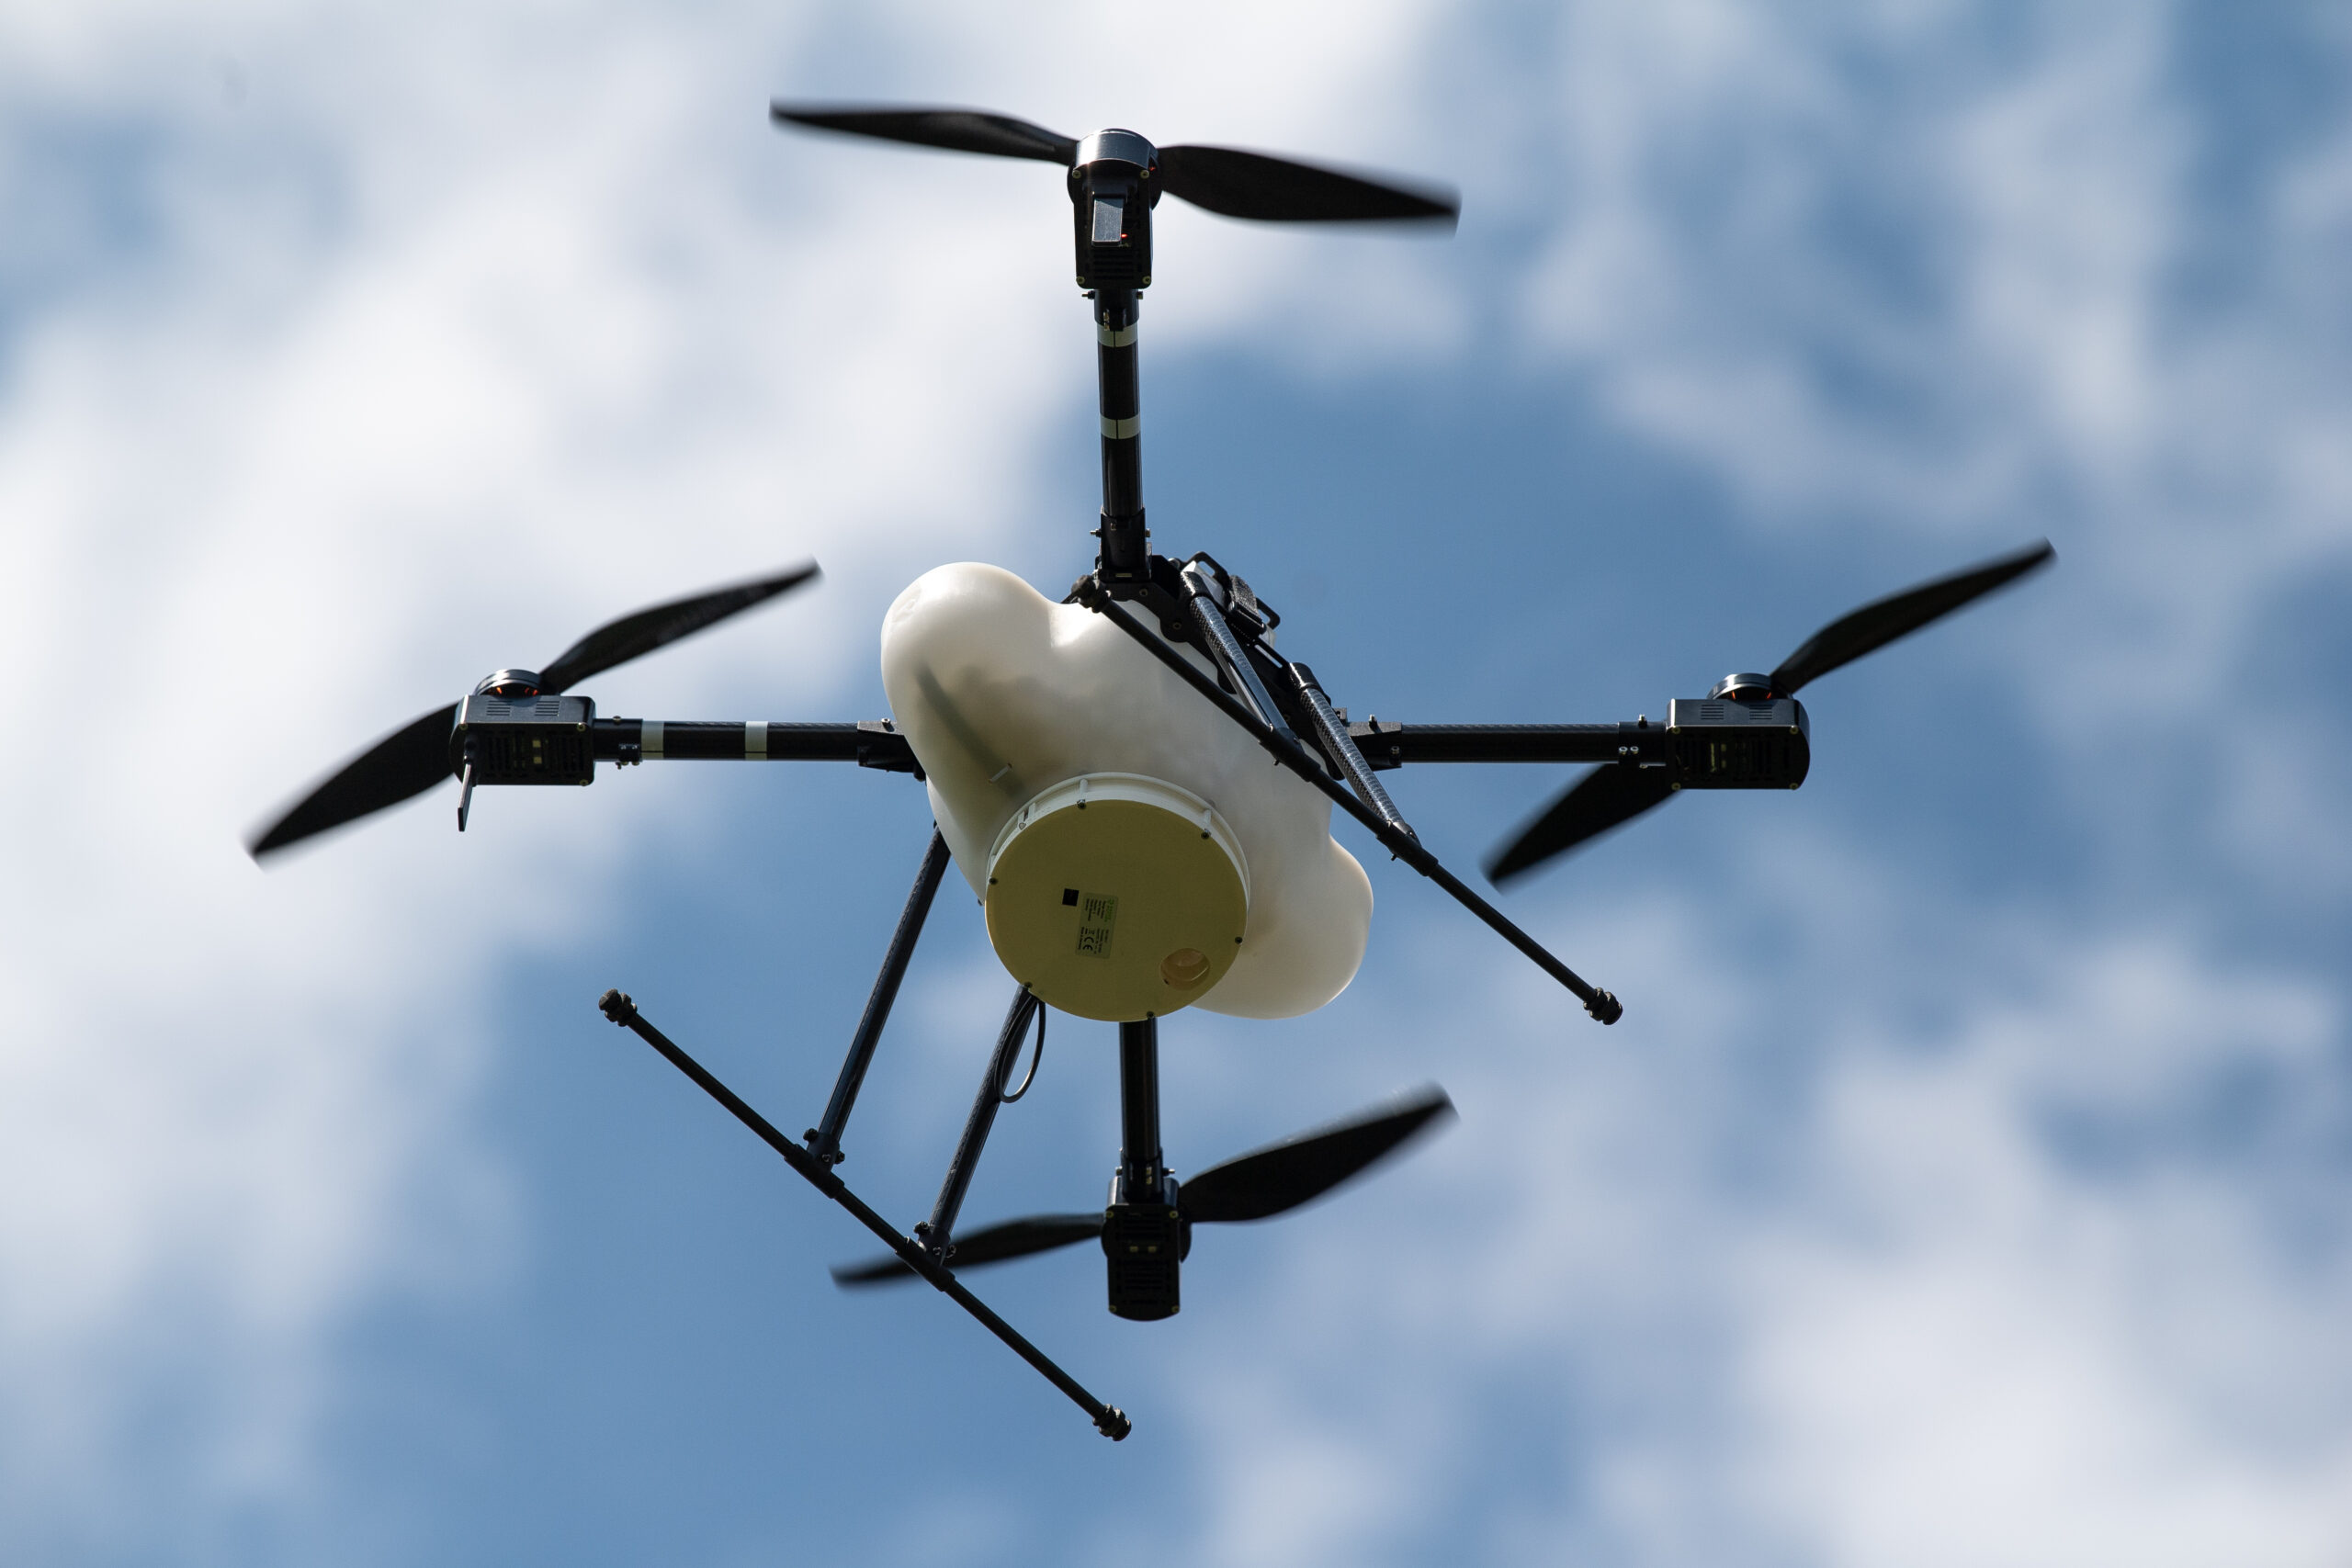 A hovering drone is shown from the bottom.